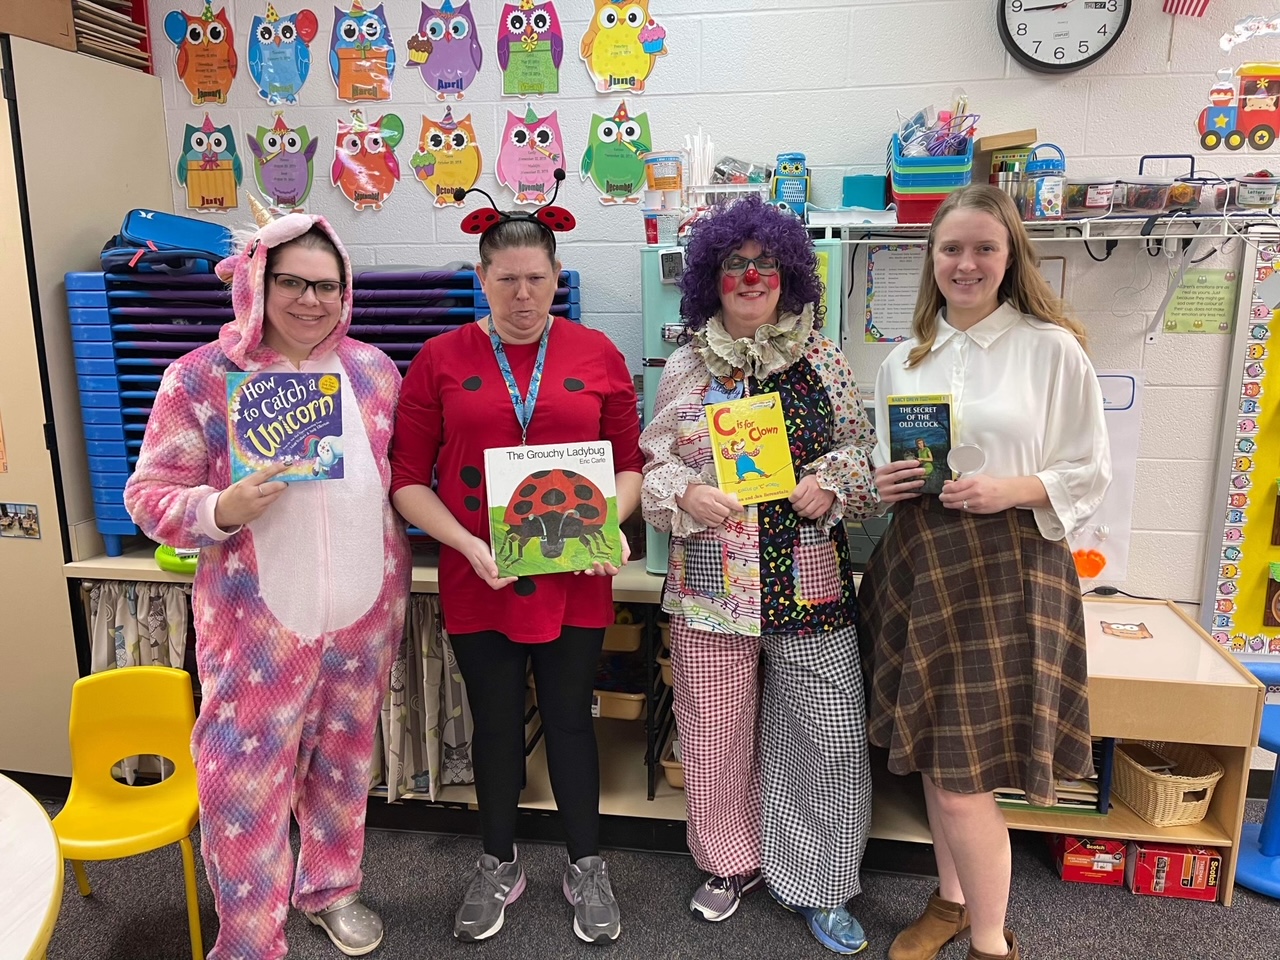 Students and staff dressed up as their favorite book character!